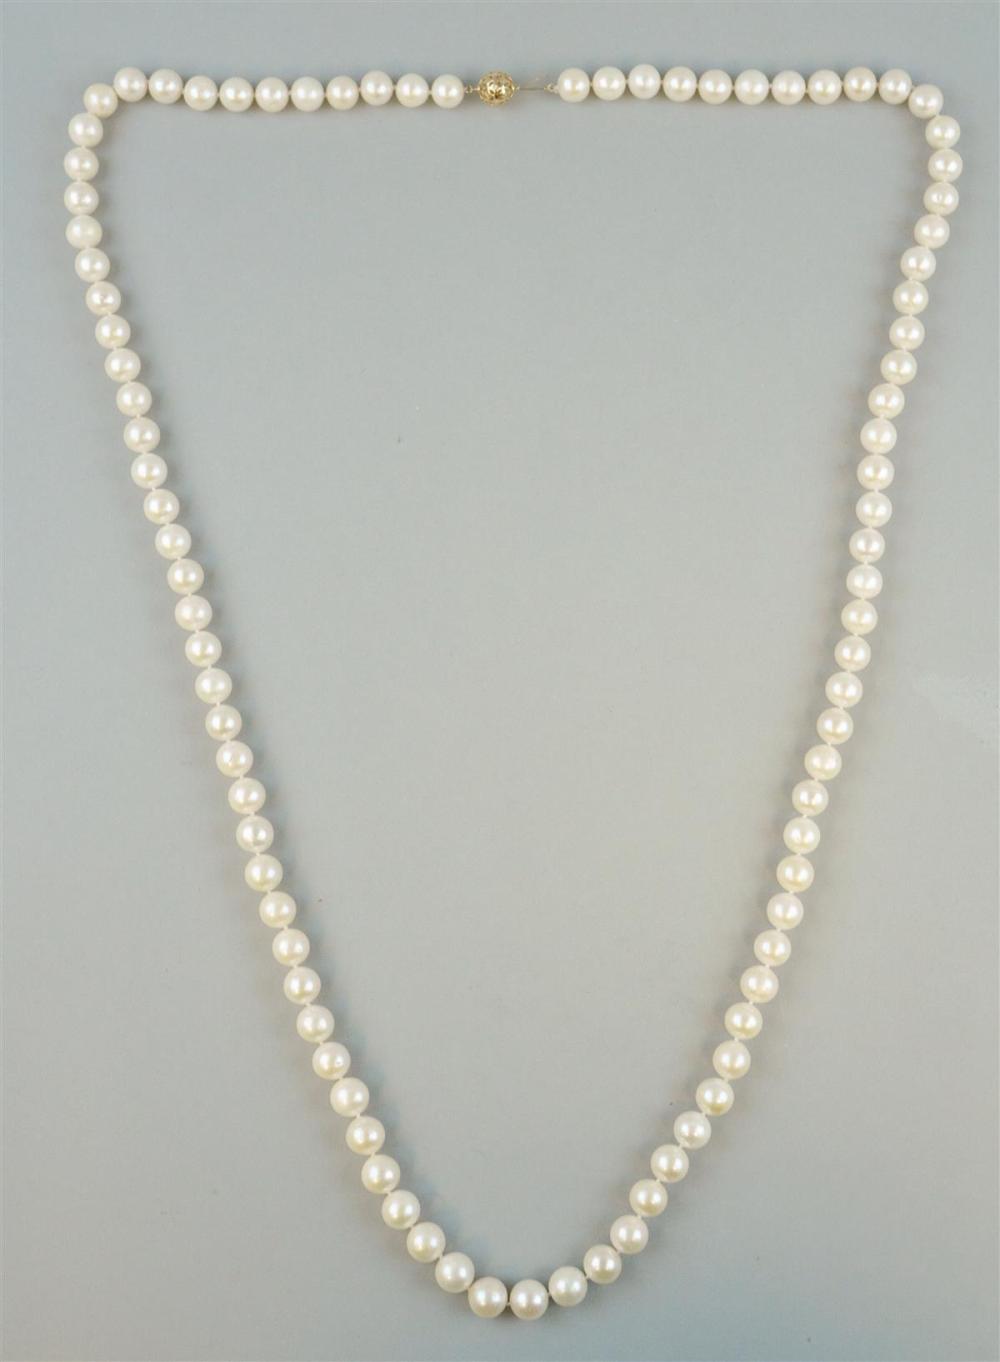 11 12 0MM SOUTH SEAS PEARL NECKLACE11 12 0MM 33aa68